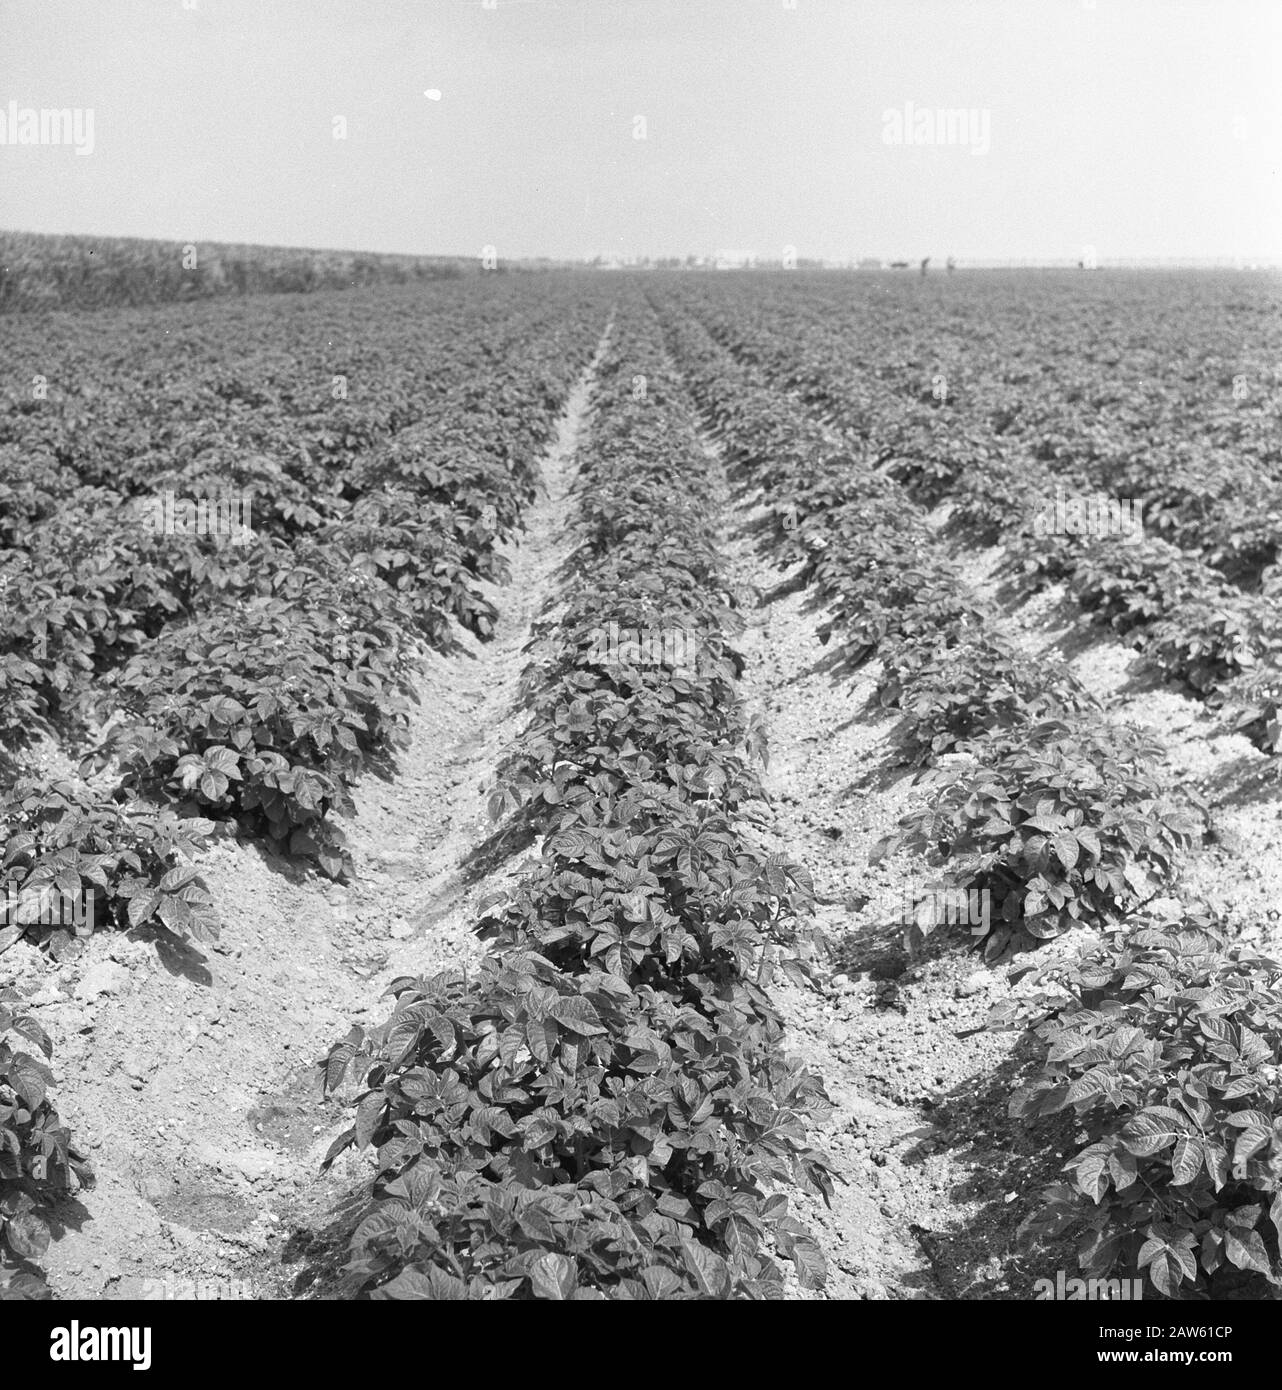 mining, sowing and harvesting crops, irrigation, nop Date: May 1957 Keywords: irrigation, cultivation, sowing and harvesting crops Person Name: nop Stock Photo